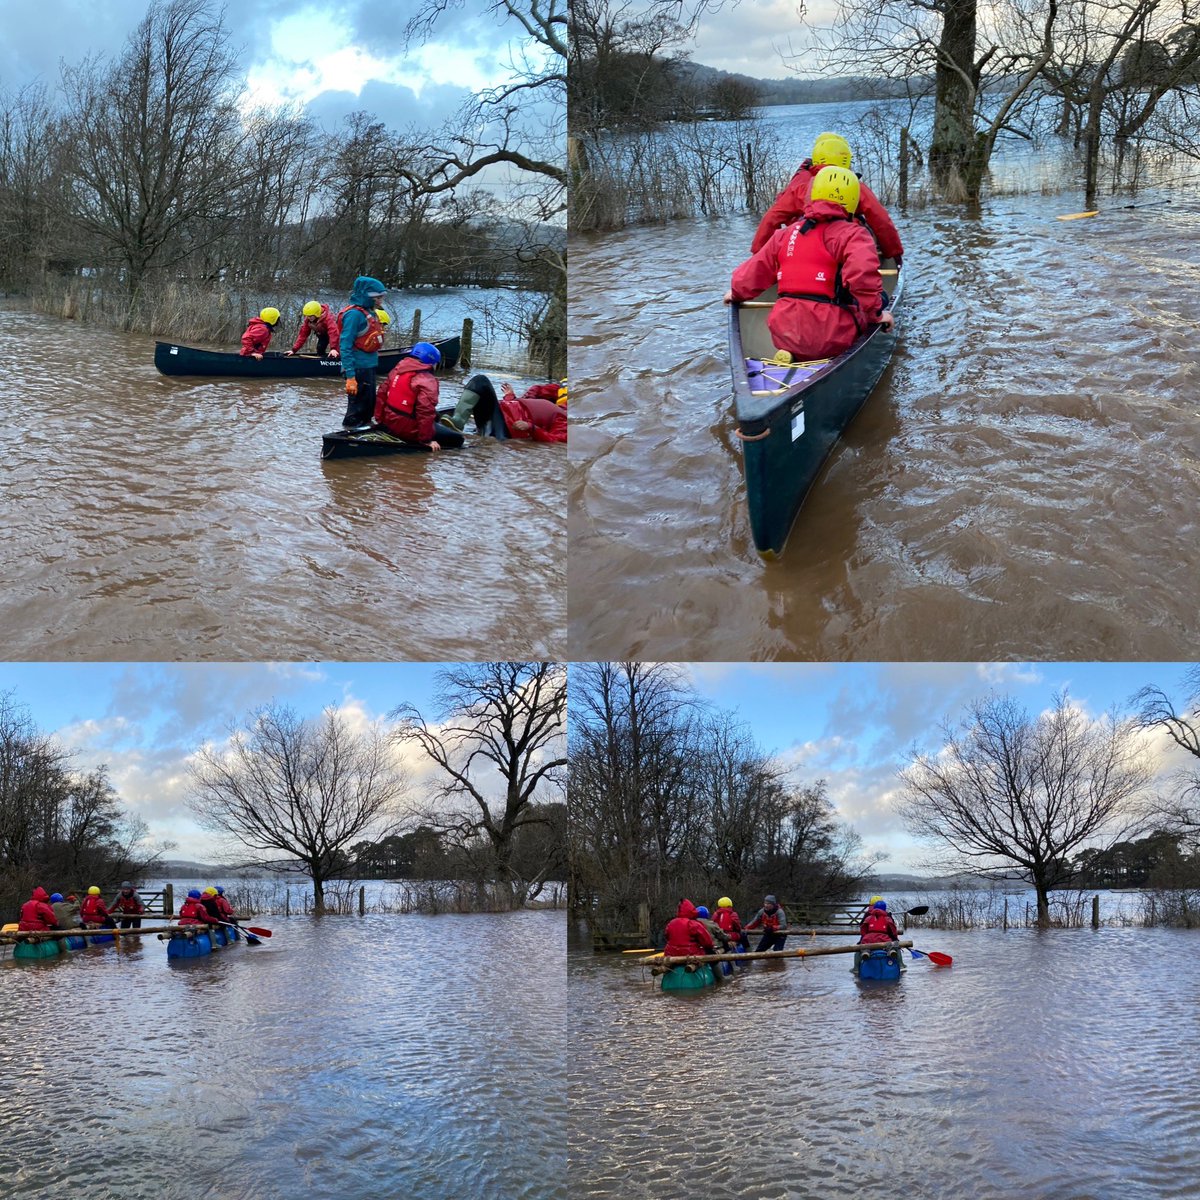 When the weather is wild and you’ve booked an Outward Bound residential ! This is a group Canoeing 🛶 and Raft Building in the Field @ Howtown! We’ve had so much #fun this week with @dixonsca A huge well done 👏 to all the young people and staff for embracing the conditions